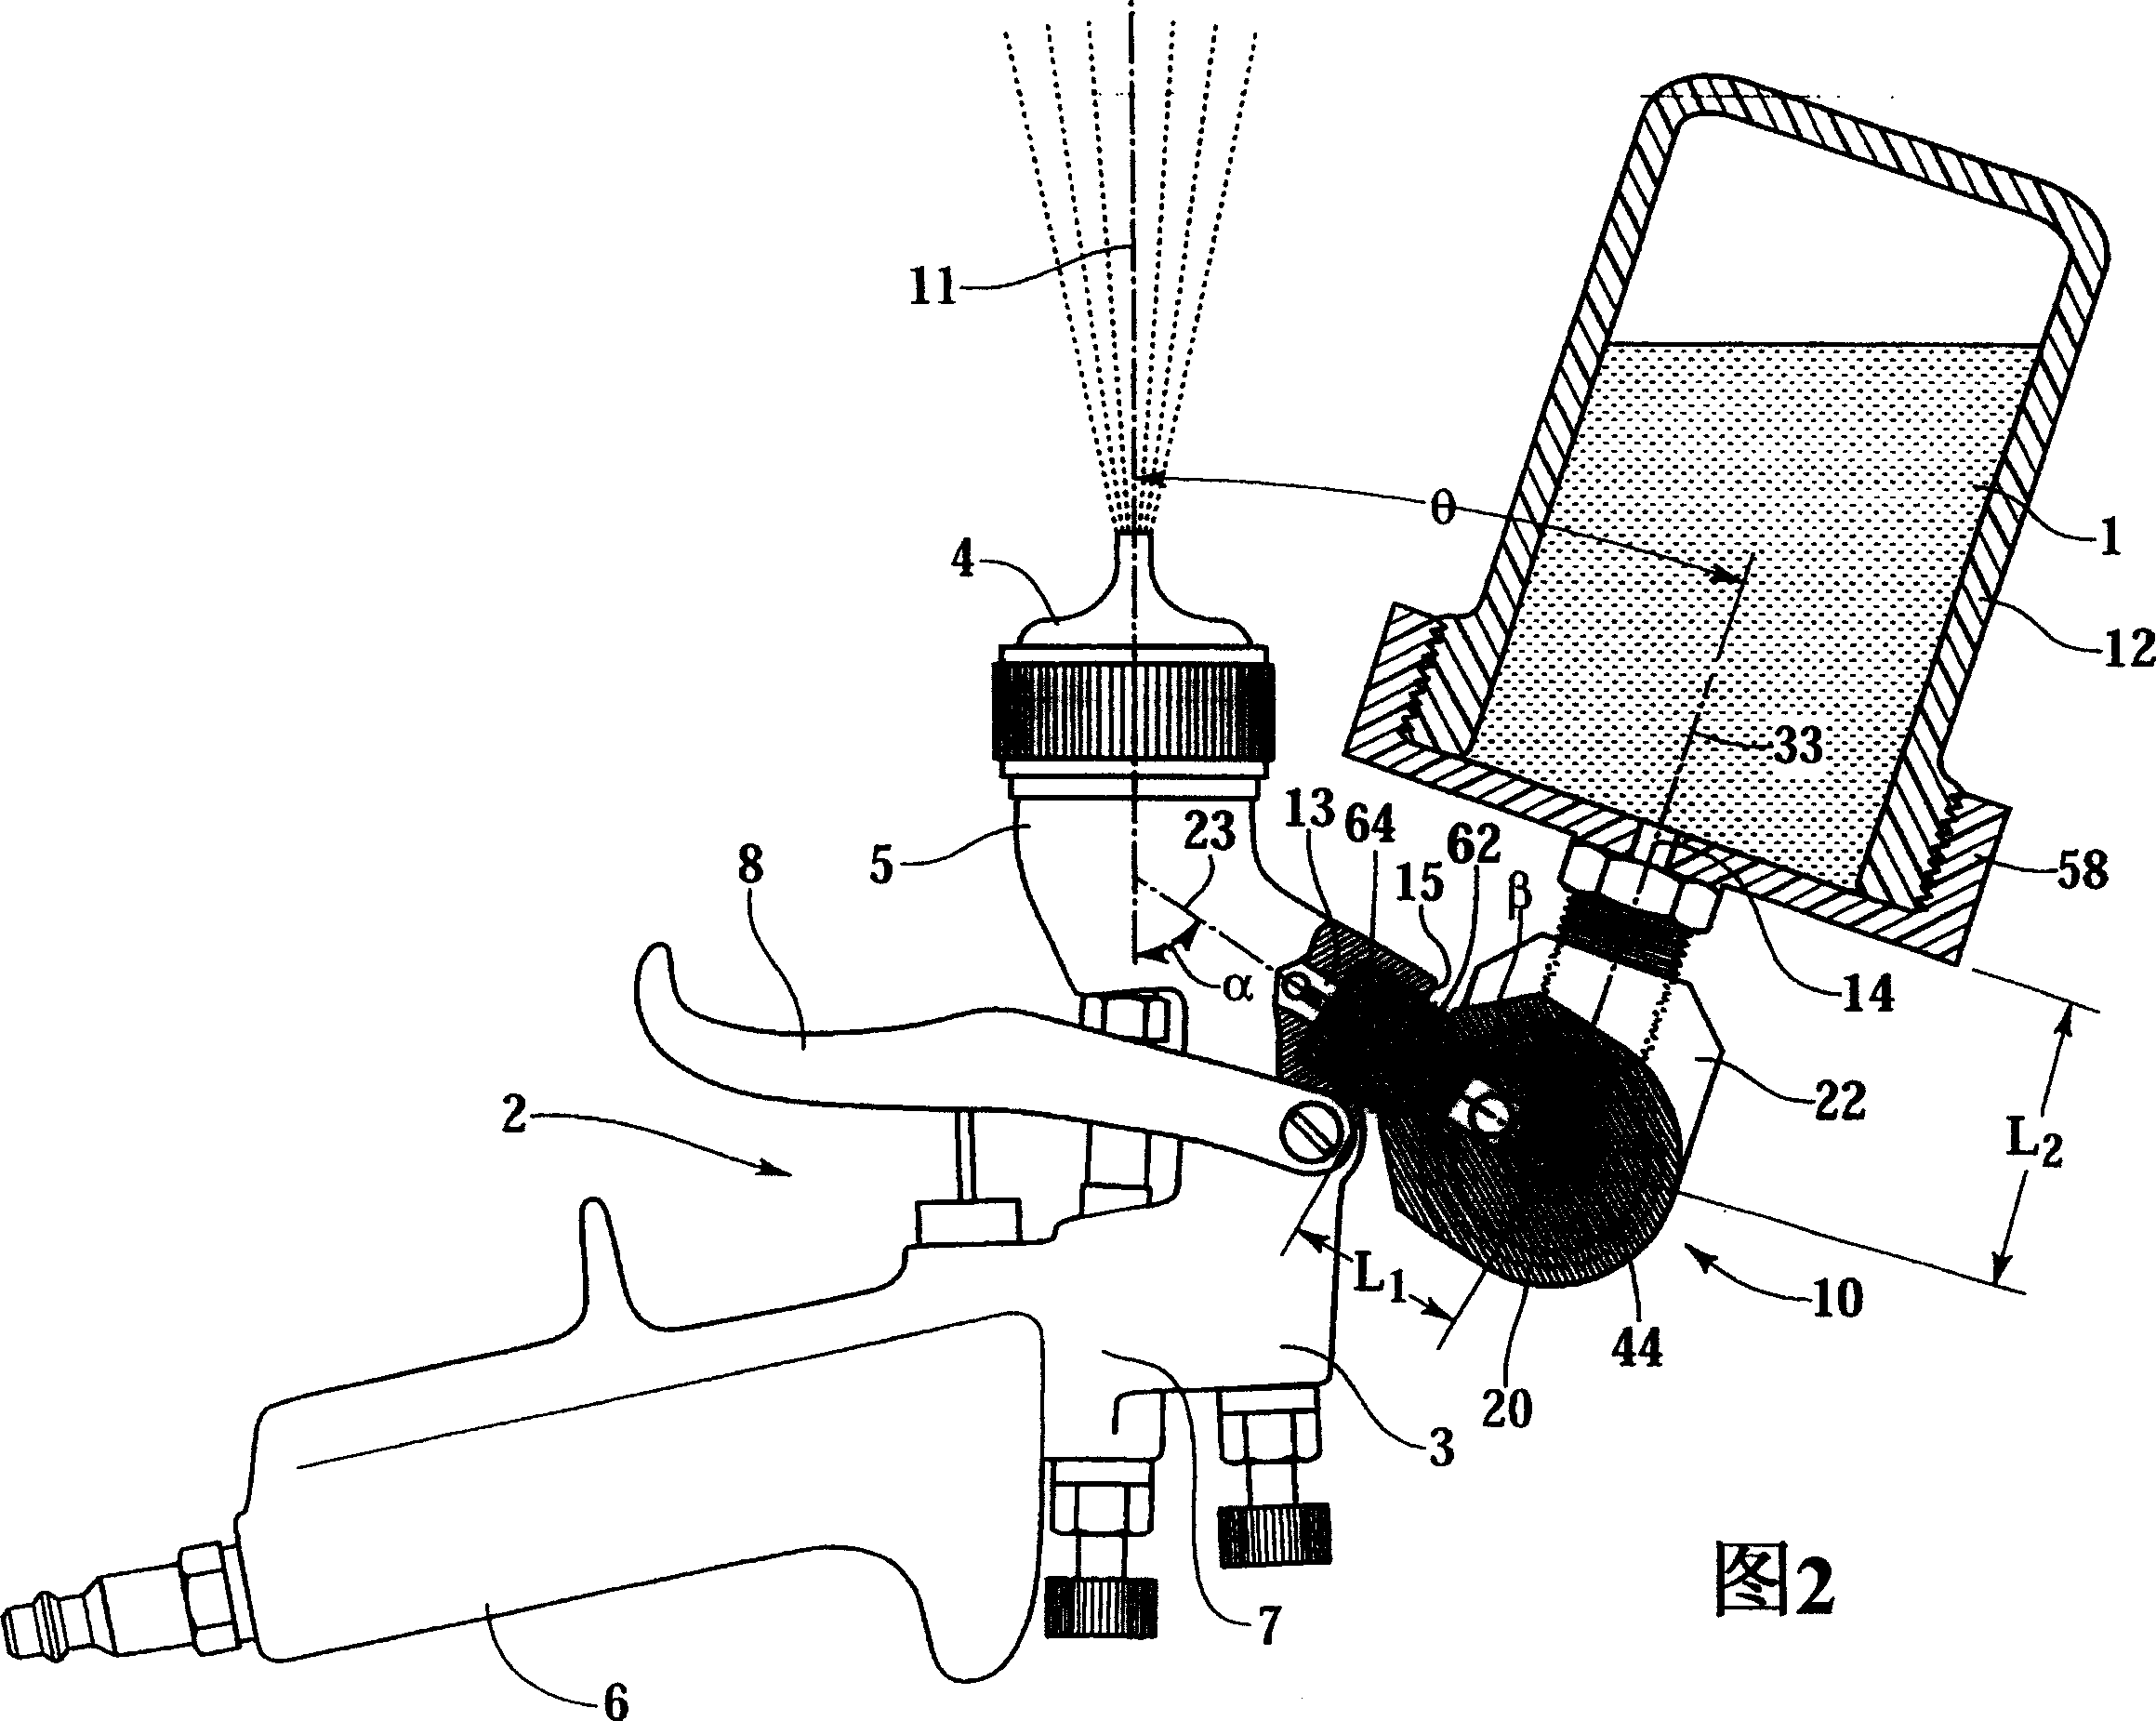 Adjustable adapter for gravity-feed paint sprayer